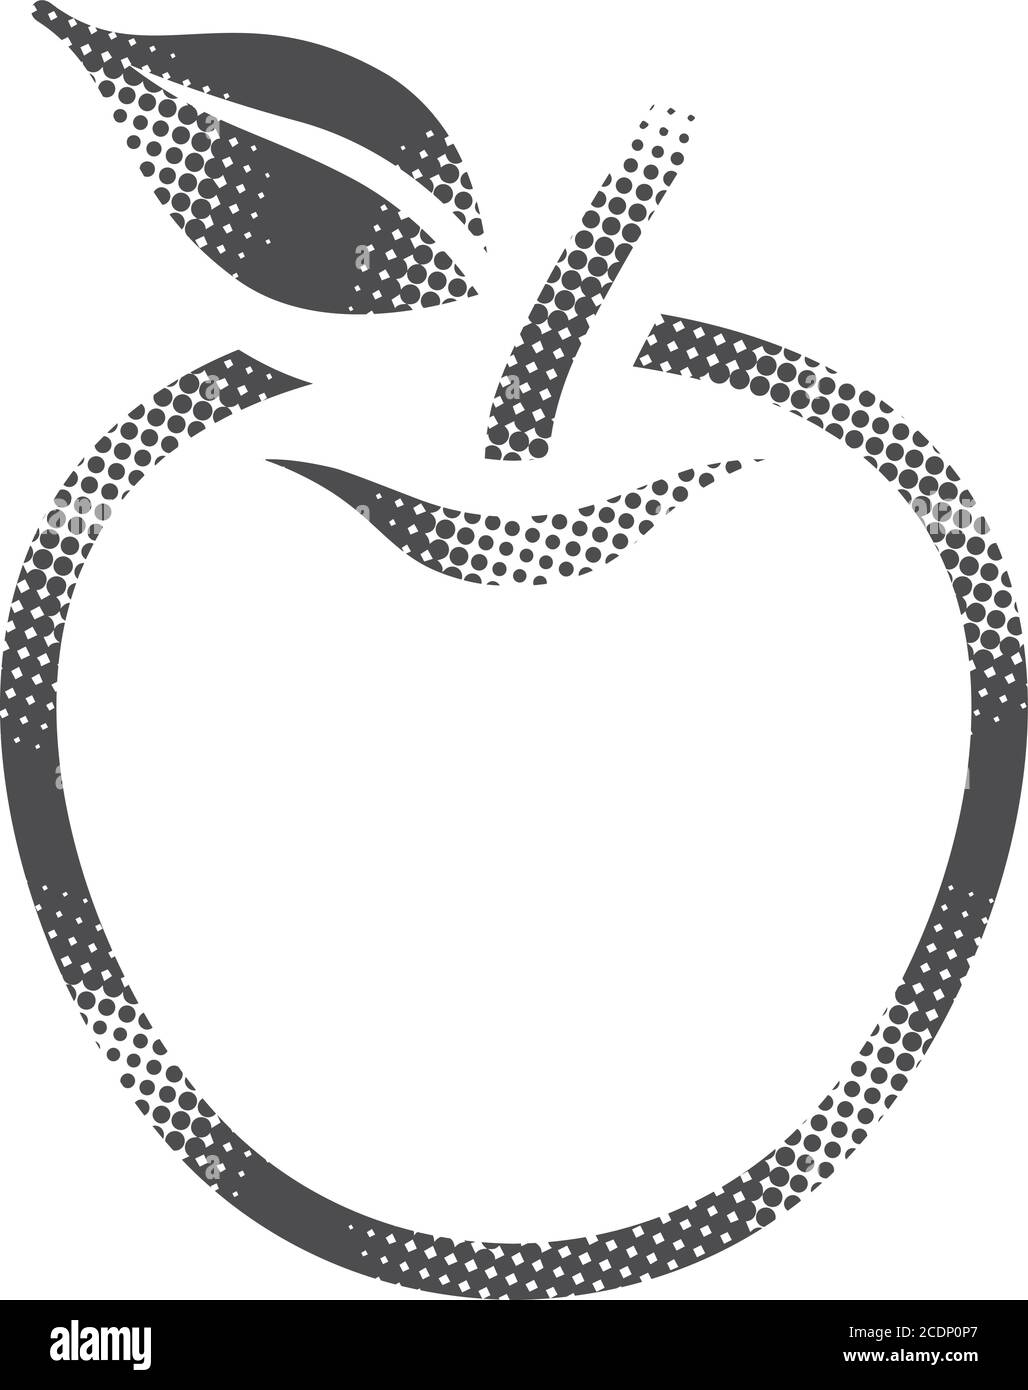 Apple icon in halftone style. Black and white monochrome vector illustration. Stock Vector